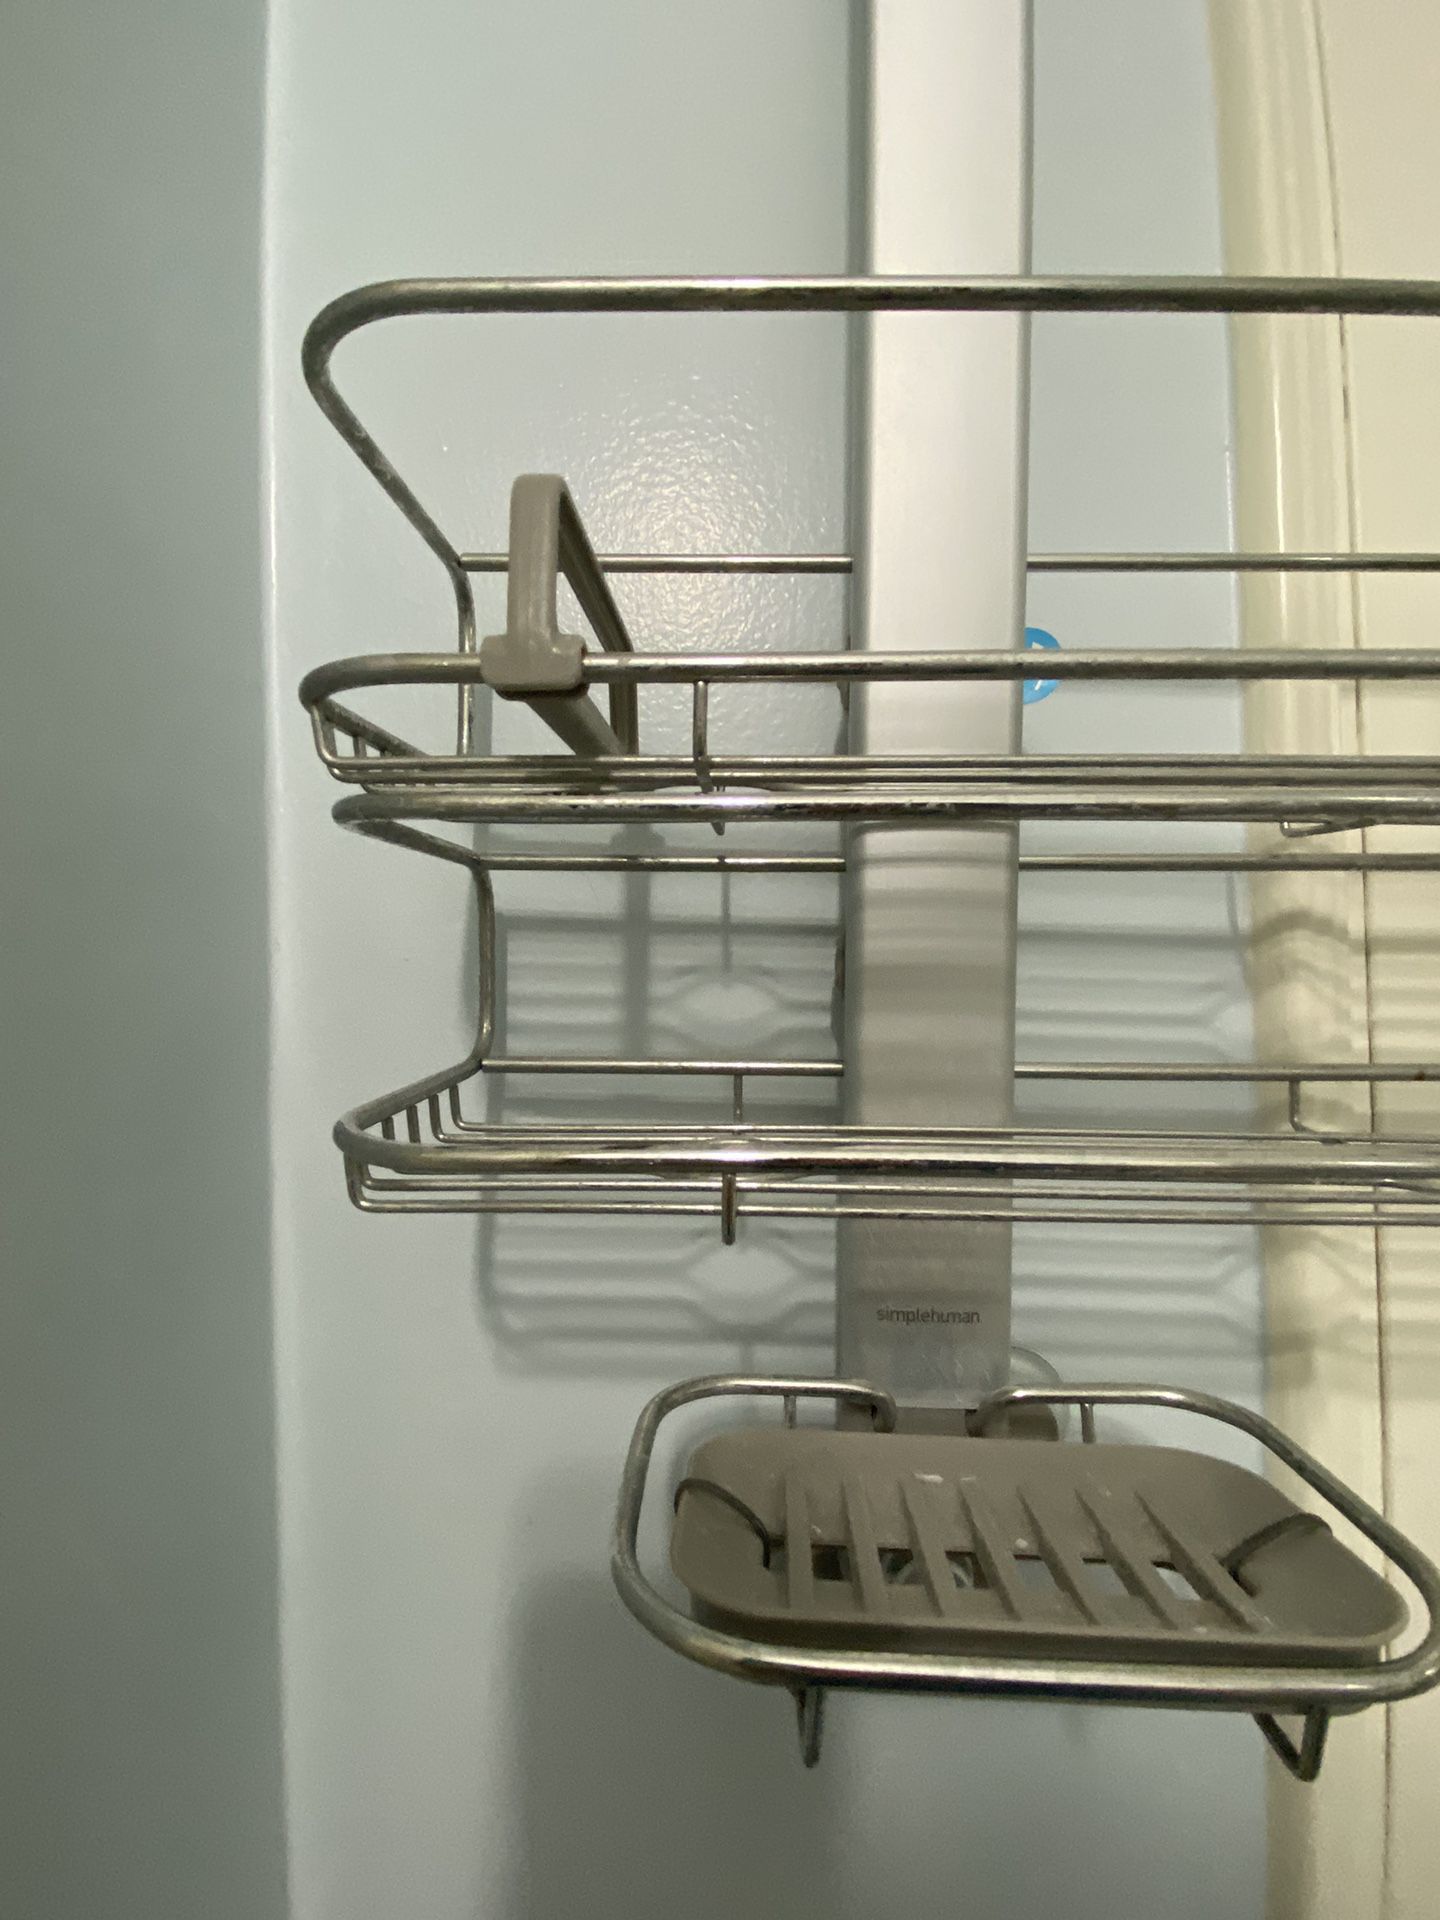 Simple Human Stainless Steel Shower Caddy for Sale in Arcadia, CA - OfferUp